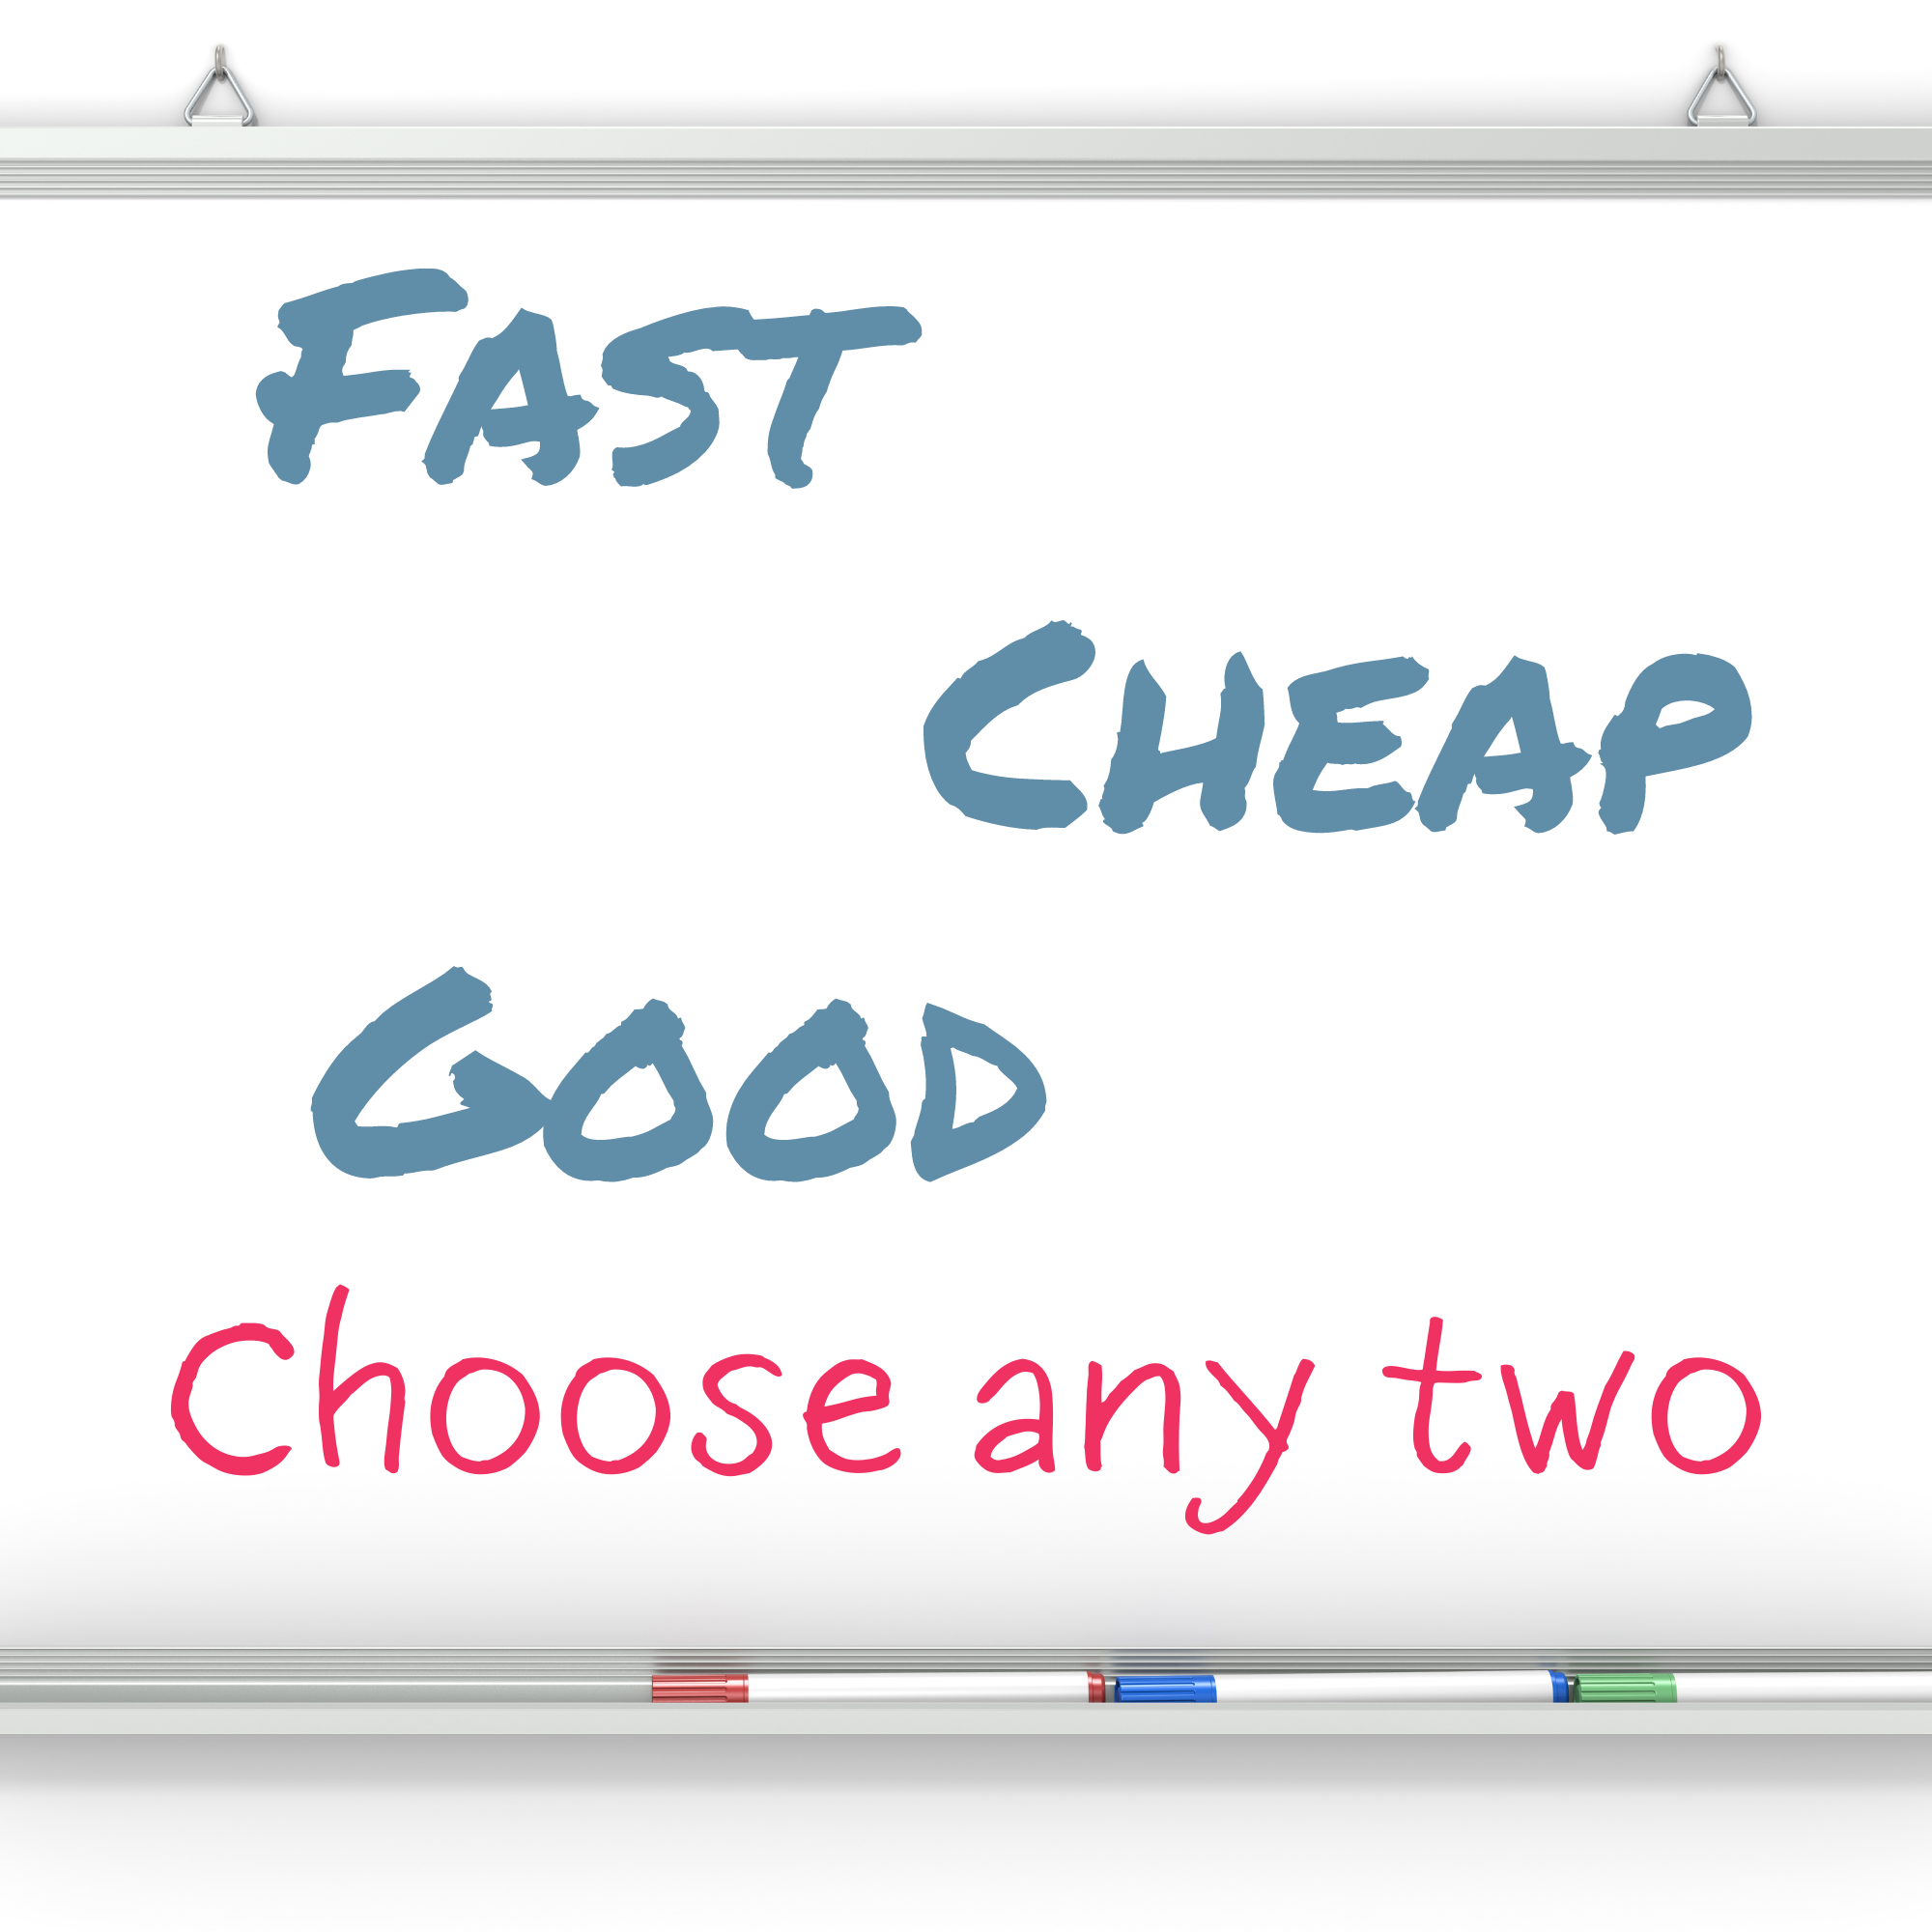 fast, good or cheap, choose any two